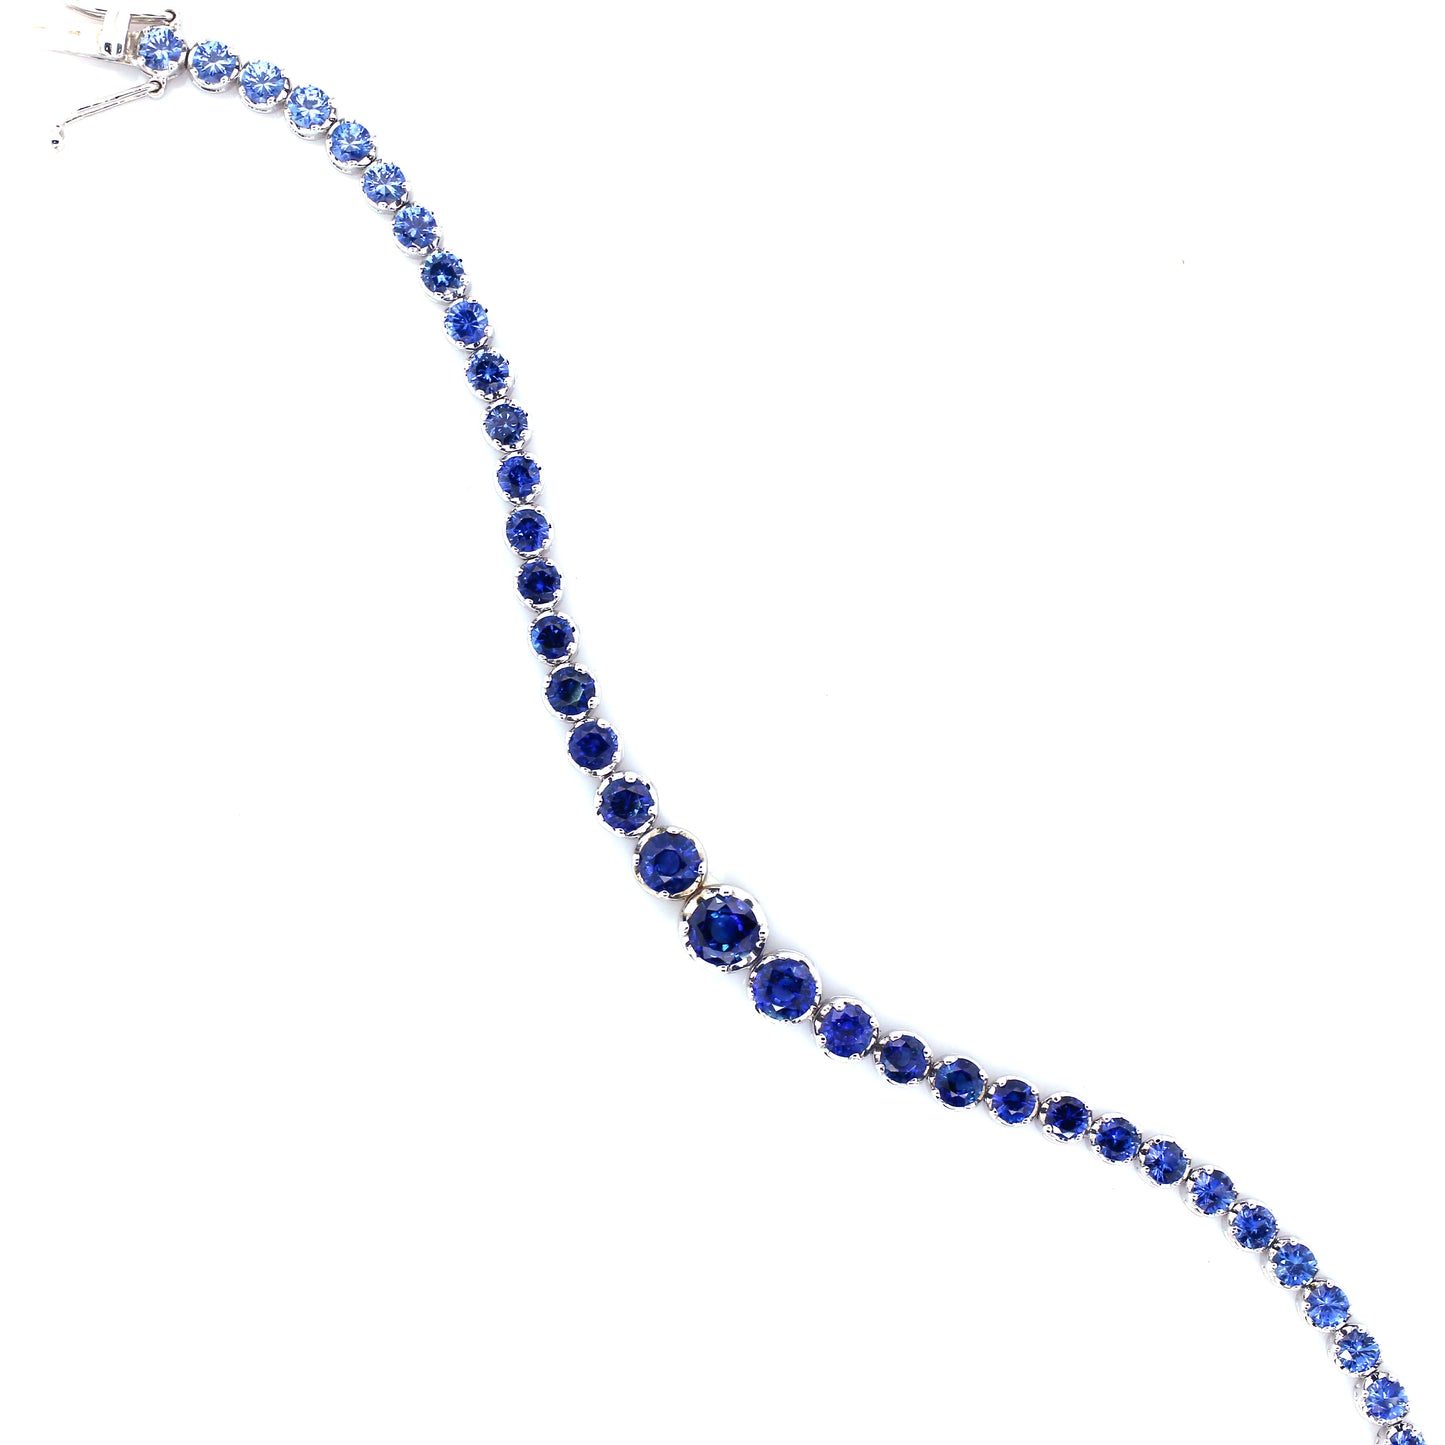 GORGEOUS BLUE SAPPHIRE  BRACELET FOR ALL OCCASIONS